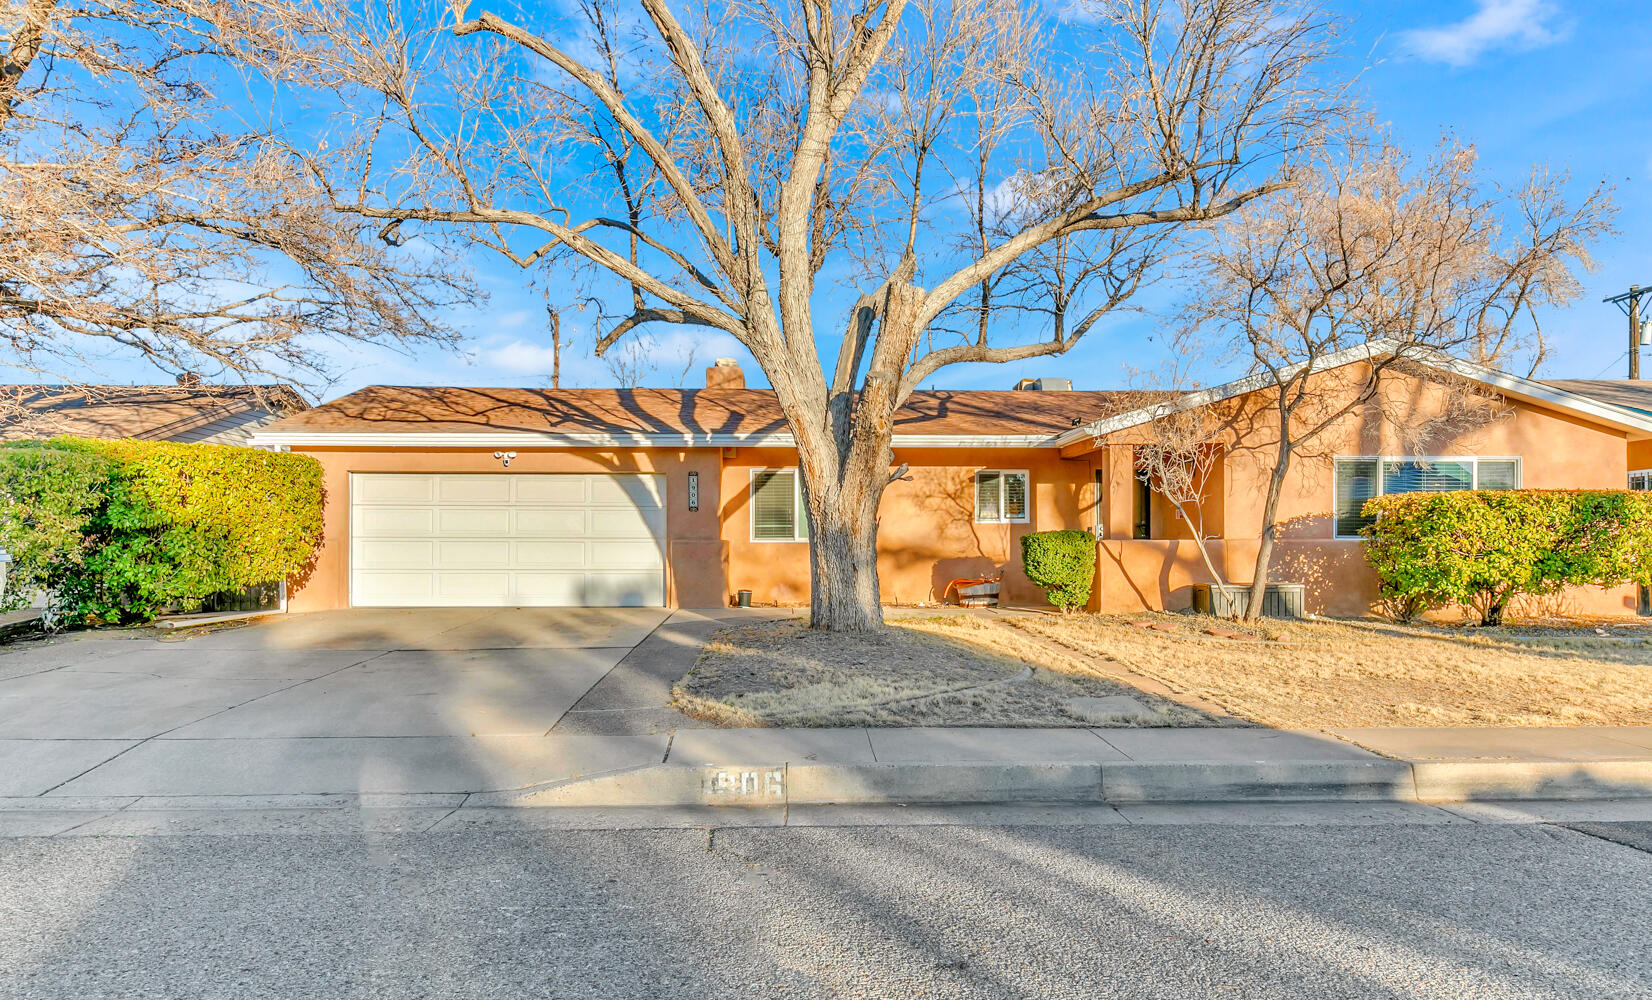 Wonderful single story home situated on a cul-de-sac near UNM North Campus!  This light filled property features: Multiple living areas including a great room adorned with bookshelves & cozy fireplace, Bonus/flex room, NO carpet, Beautifully finished wood floors, Chef's kitchen w/ granite countertops, breakfast nook & lots of cabinet space, Large primary suite w/ walk in closet & en-suite bath,  3 additional spacious bedrooms, Guest bath w/ double sinks & granite counters, Oversized, finished 2 car garage w/ room for storage, a sink in laundry area & pull down stairs to the attic!  Large yard w/ patio, lawn & garden/storage shed. ALL NEW in 2022: Plumbing, Electrical Panel, Whole house potassium water softener & Reverse osmosis system.  Don't miss this turn-key property!